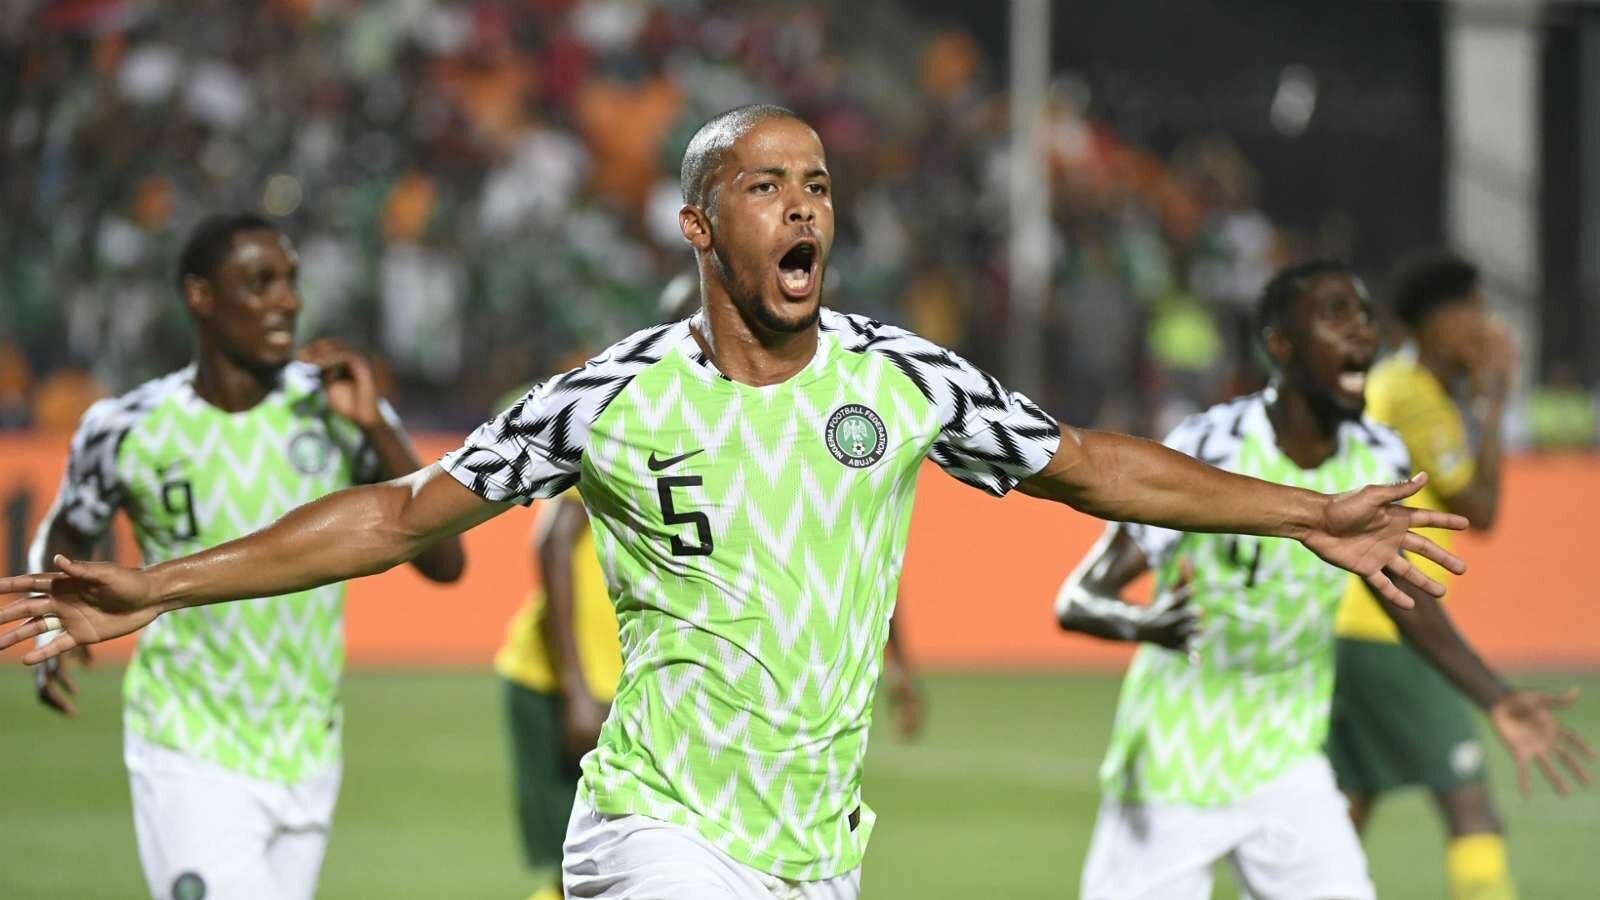 William Troost-Ekong Ends Victory Celebration, Turns Focus On S/Final